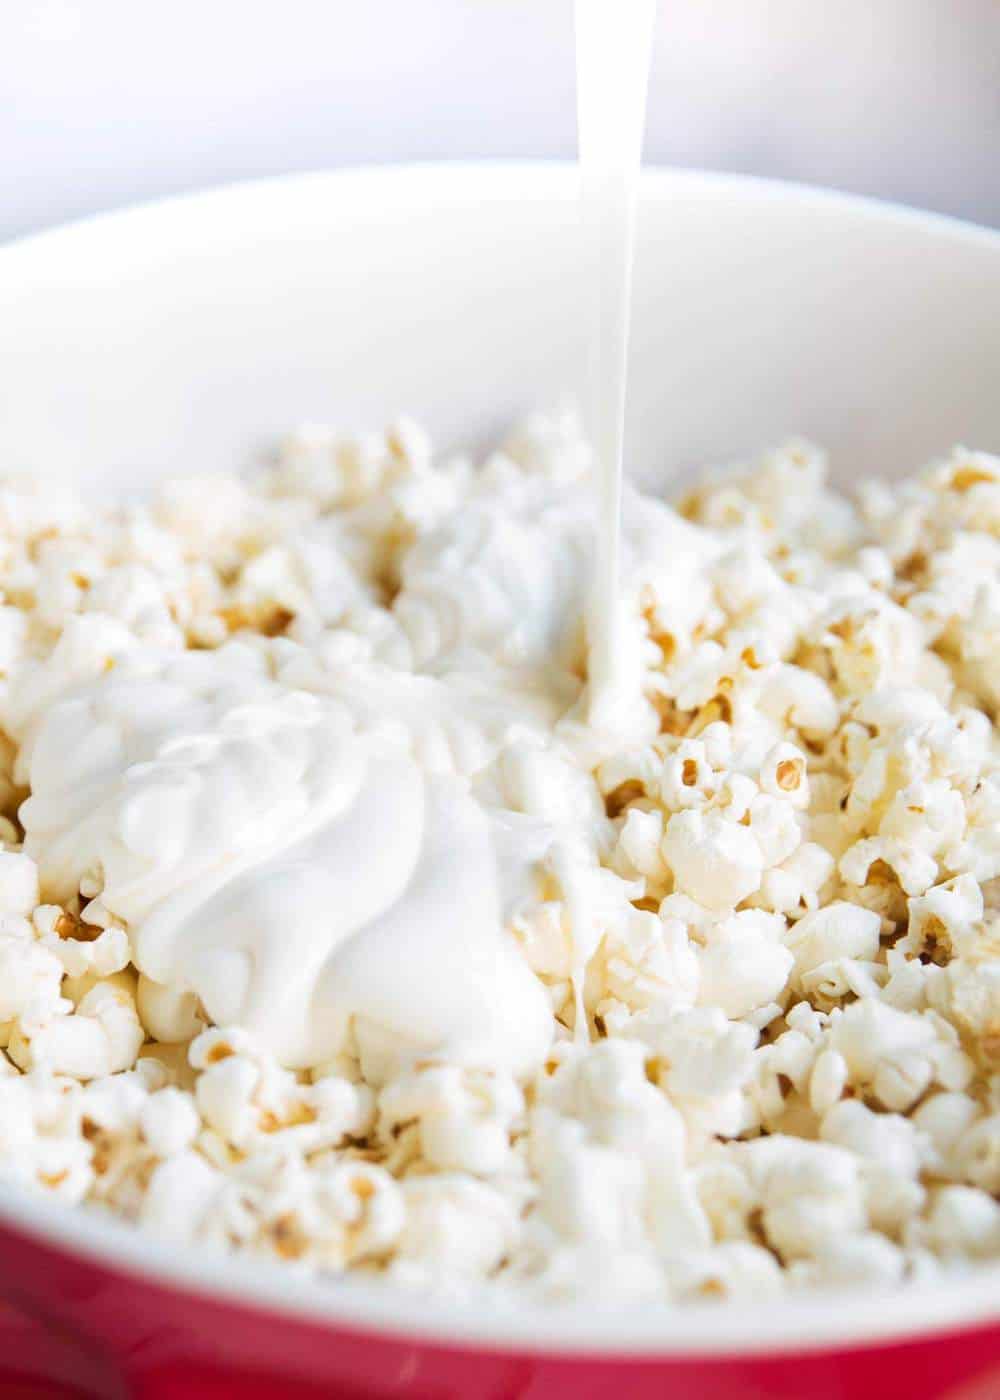 Pouring melted white chocolate over popcorn.